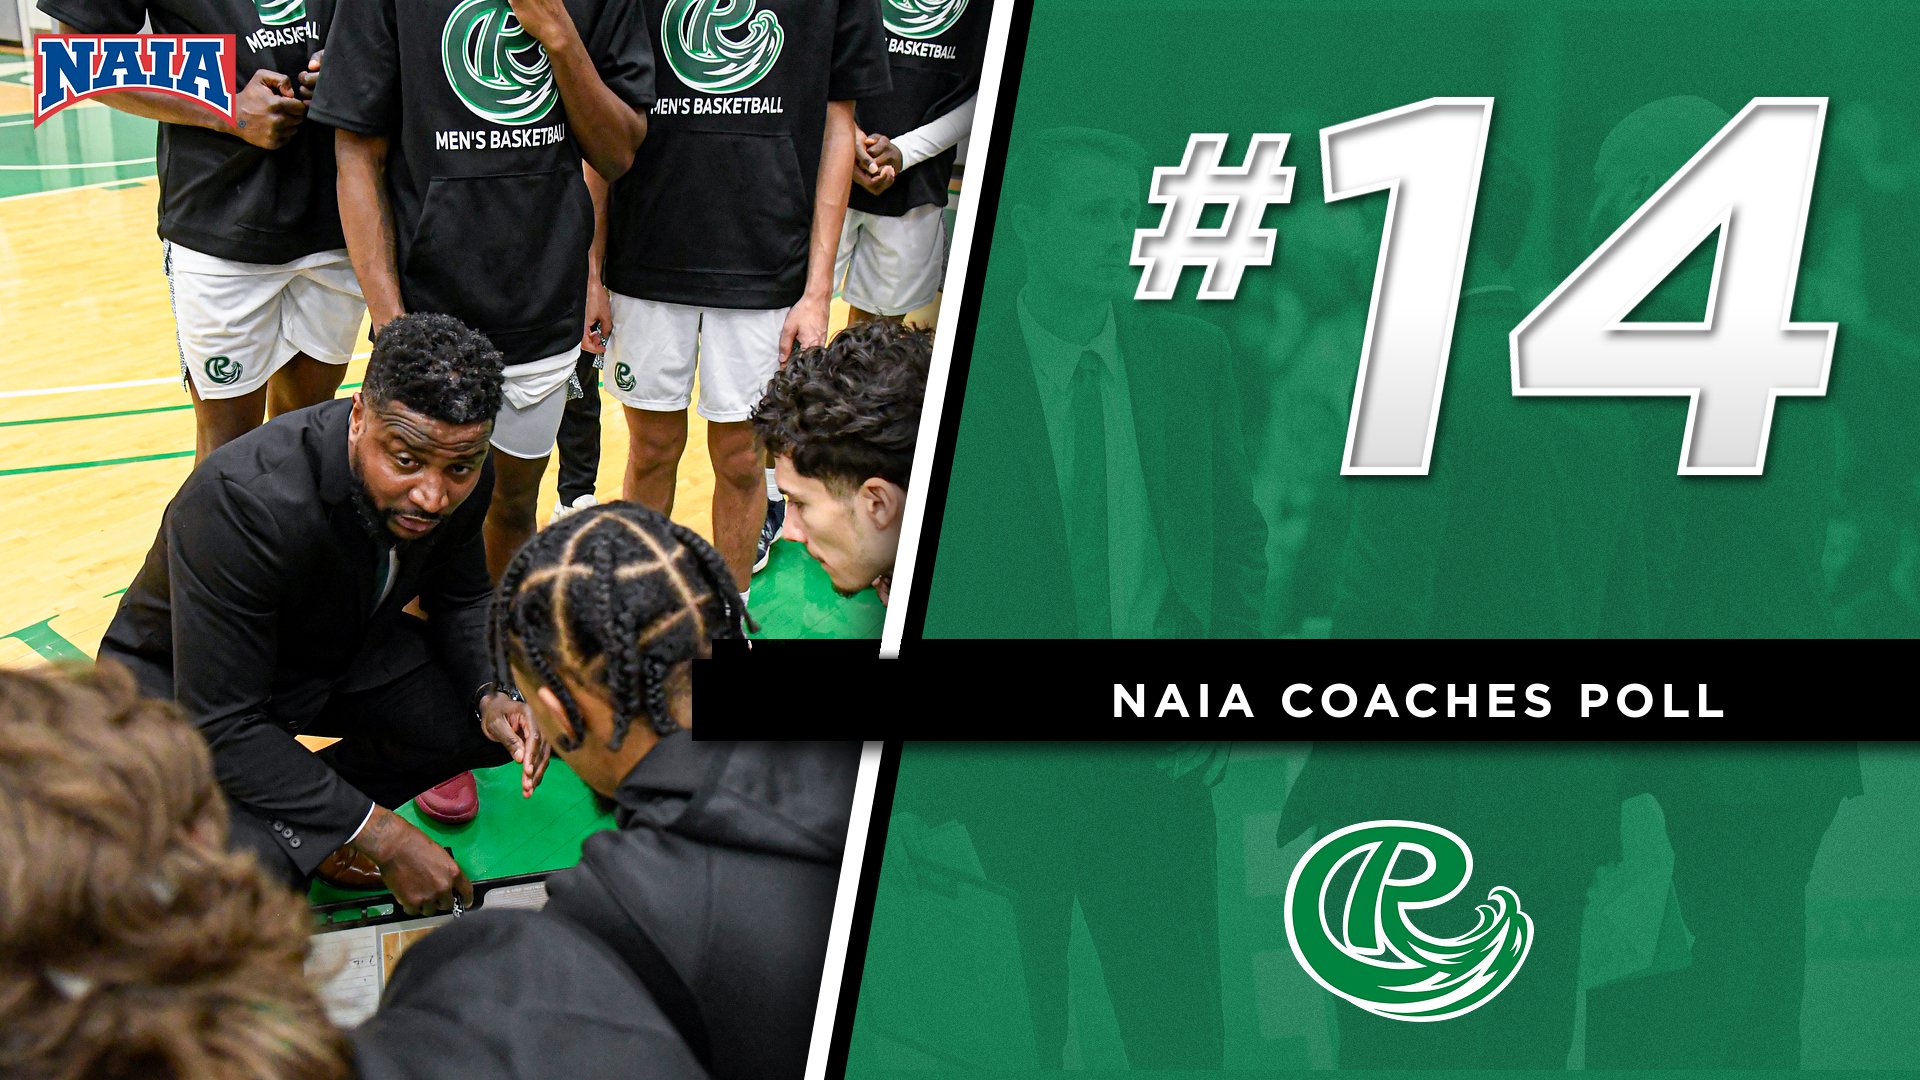 Roosevelt Comes In At No. 14 In Latest NAIA Poll